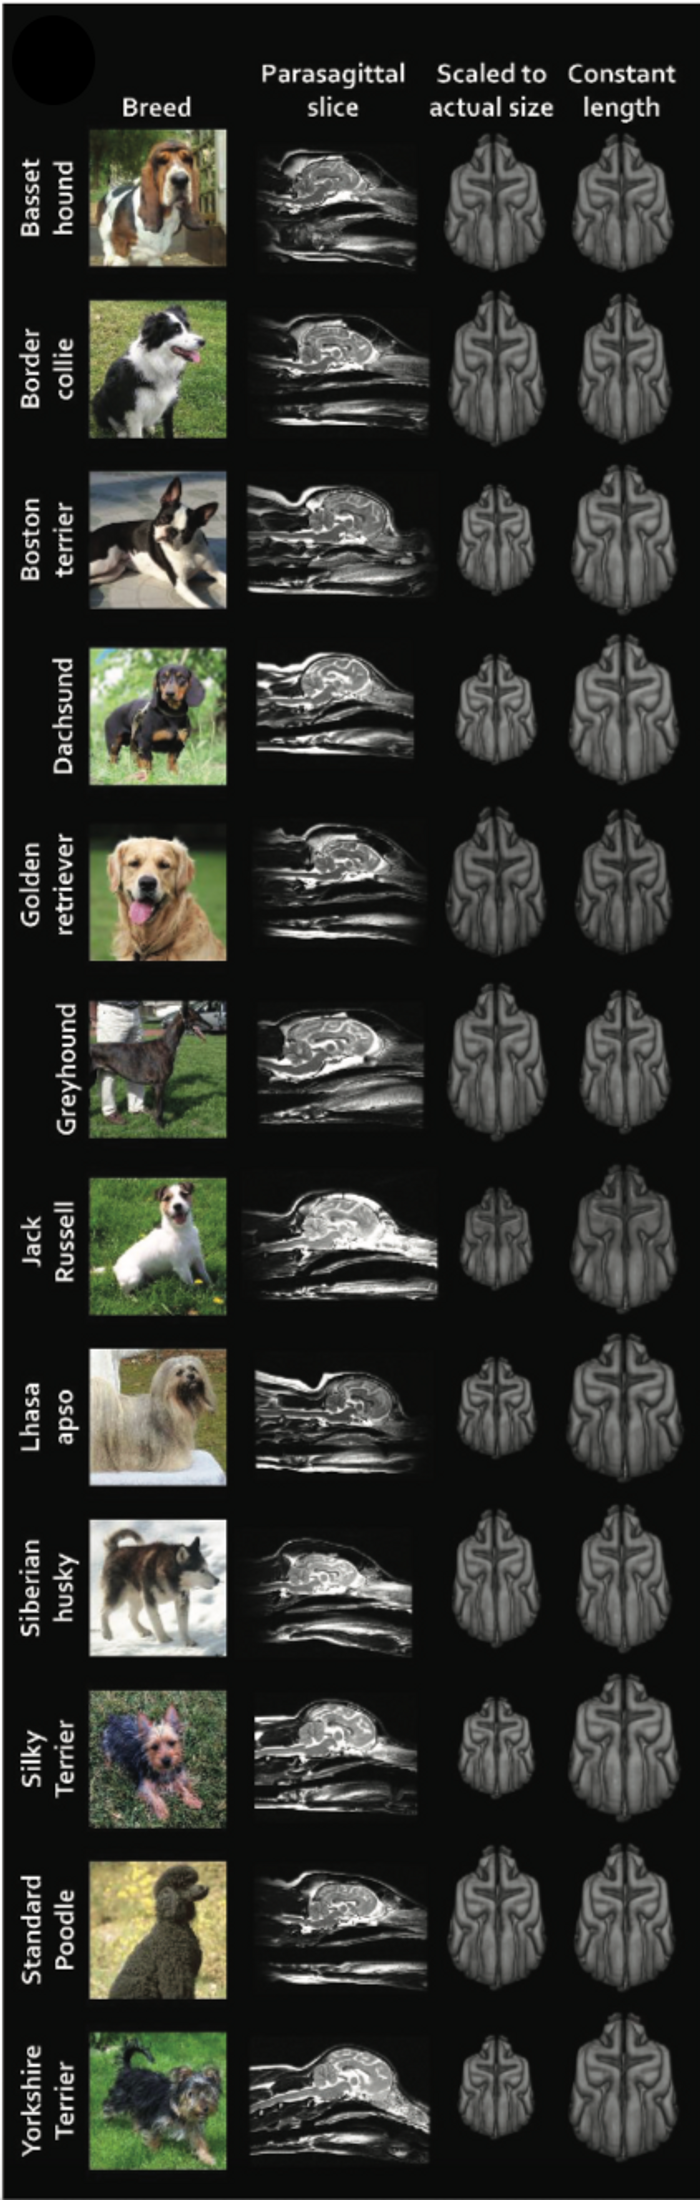 This figure from the study shows MRI scans of the brains of different dog breeds. It is clear that there are significant observable differences between each breed.